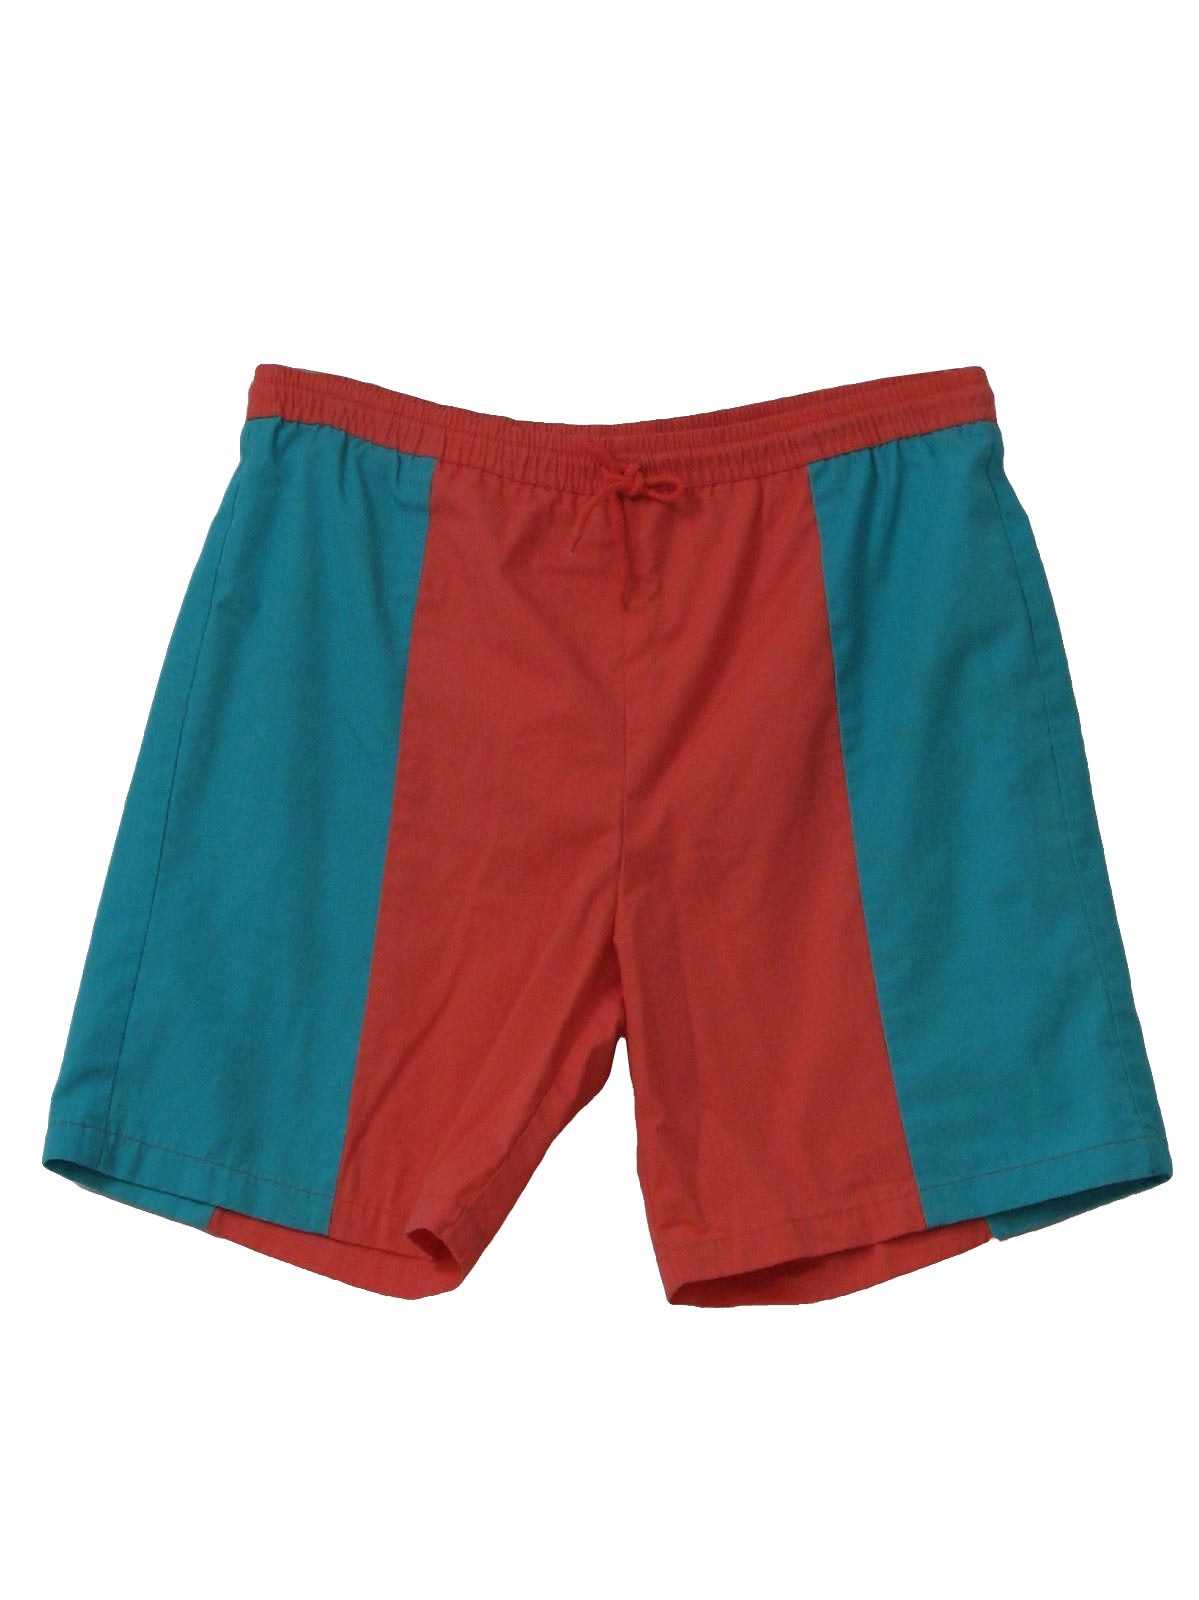 90s Retro Shorts: Early 90s -Lifetrends- Mens bright pink/orange coral ...